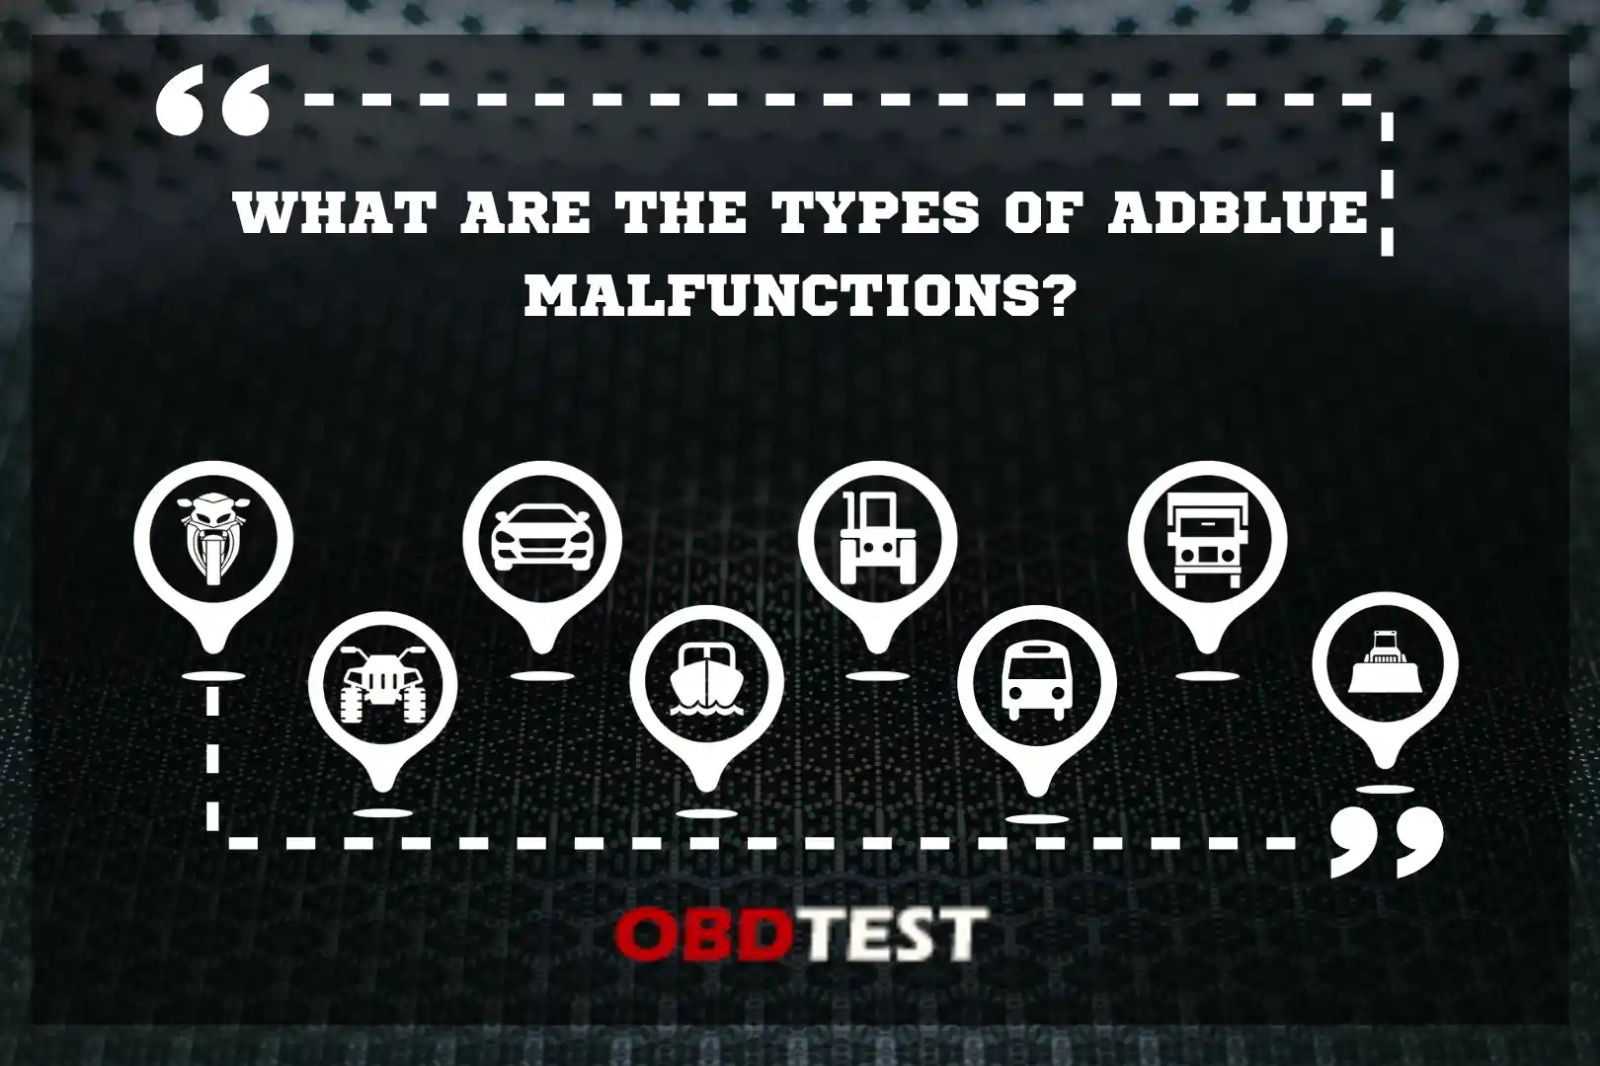 What are the types of Adblue malfunctions?